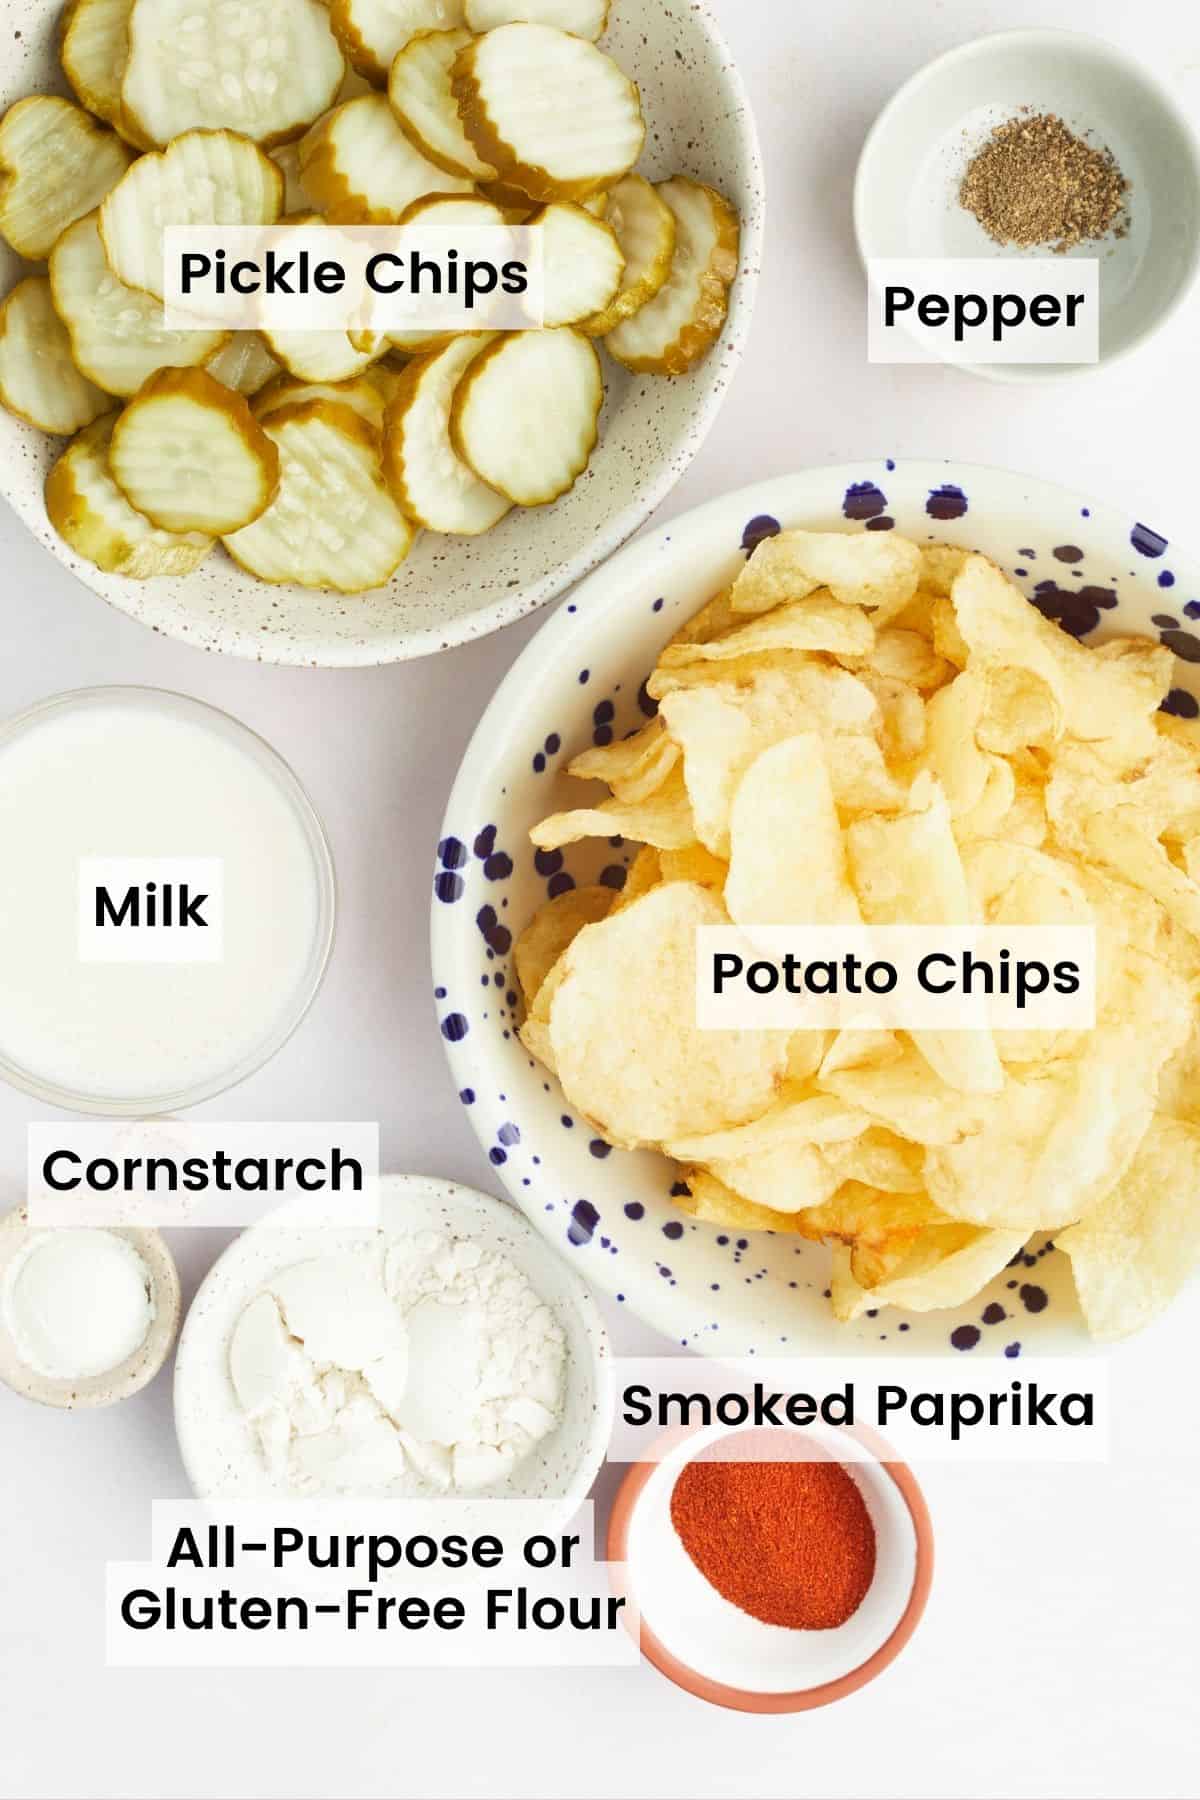 The ingredients for air fryer fried pickles are shown portioned out with text labels: pickle slices, potato chips, gluten free flour, cornstarch, paprika, milk, pepper.